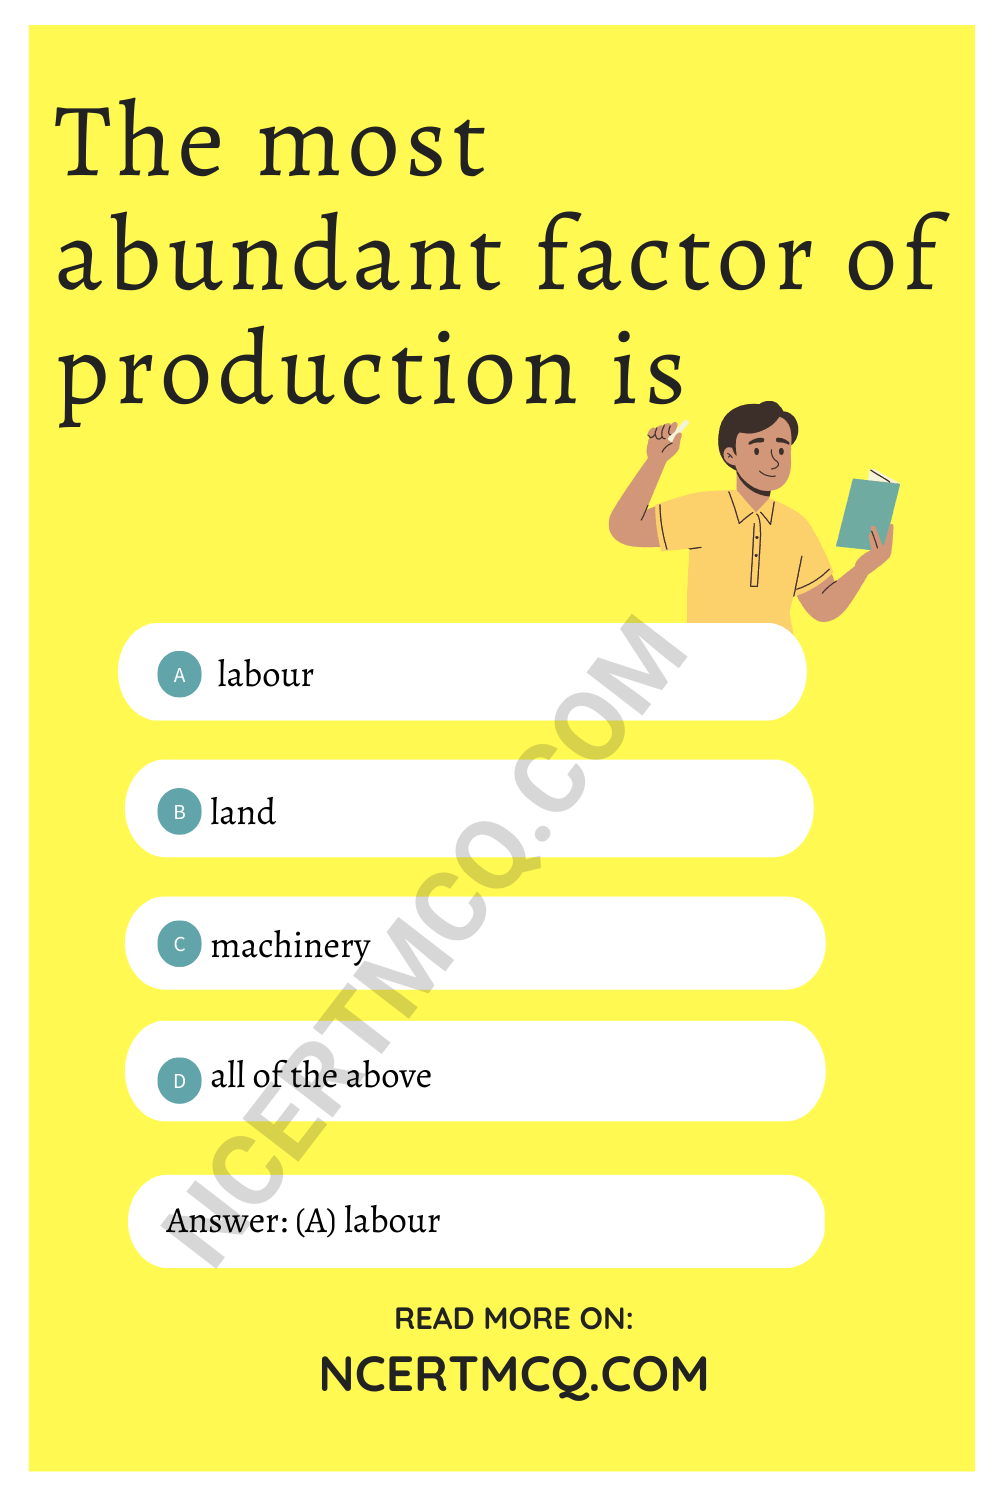 The most abundant factor of production is